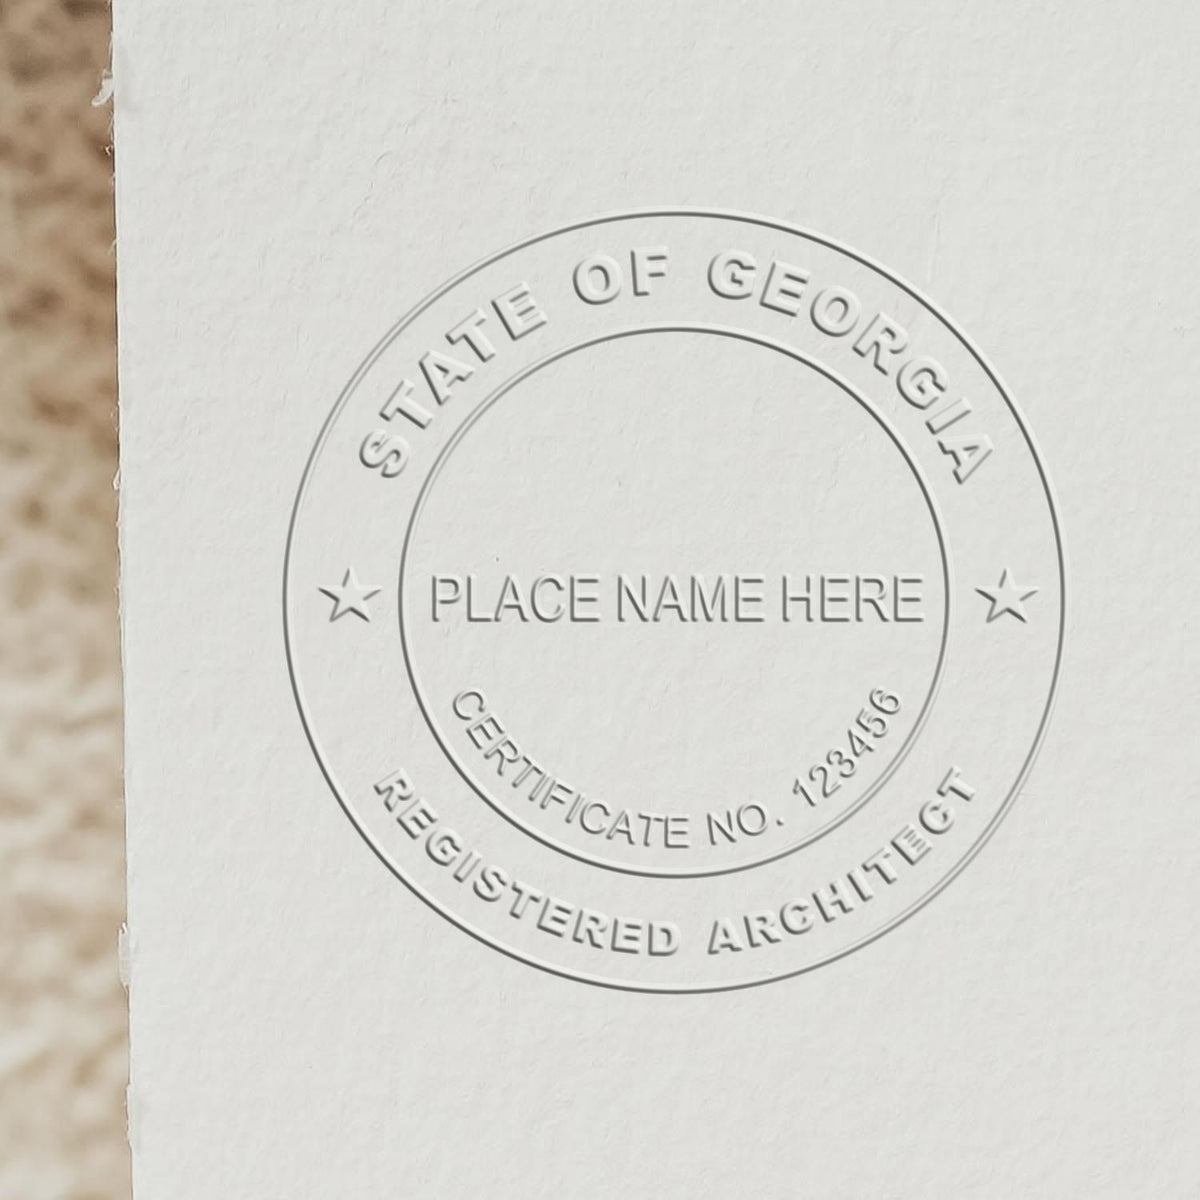 The State of Georgia Long Reach Architectural Embossing Seal stamp impression comes to life with a crisp, detailed photo on paper - showcasing true professional quality.